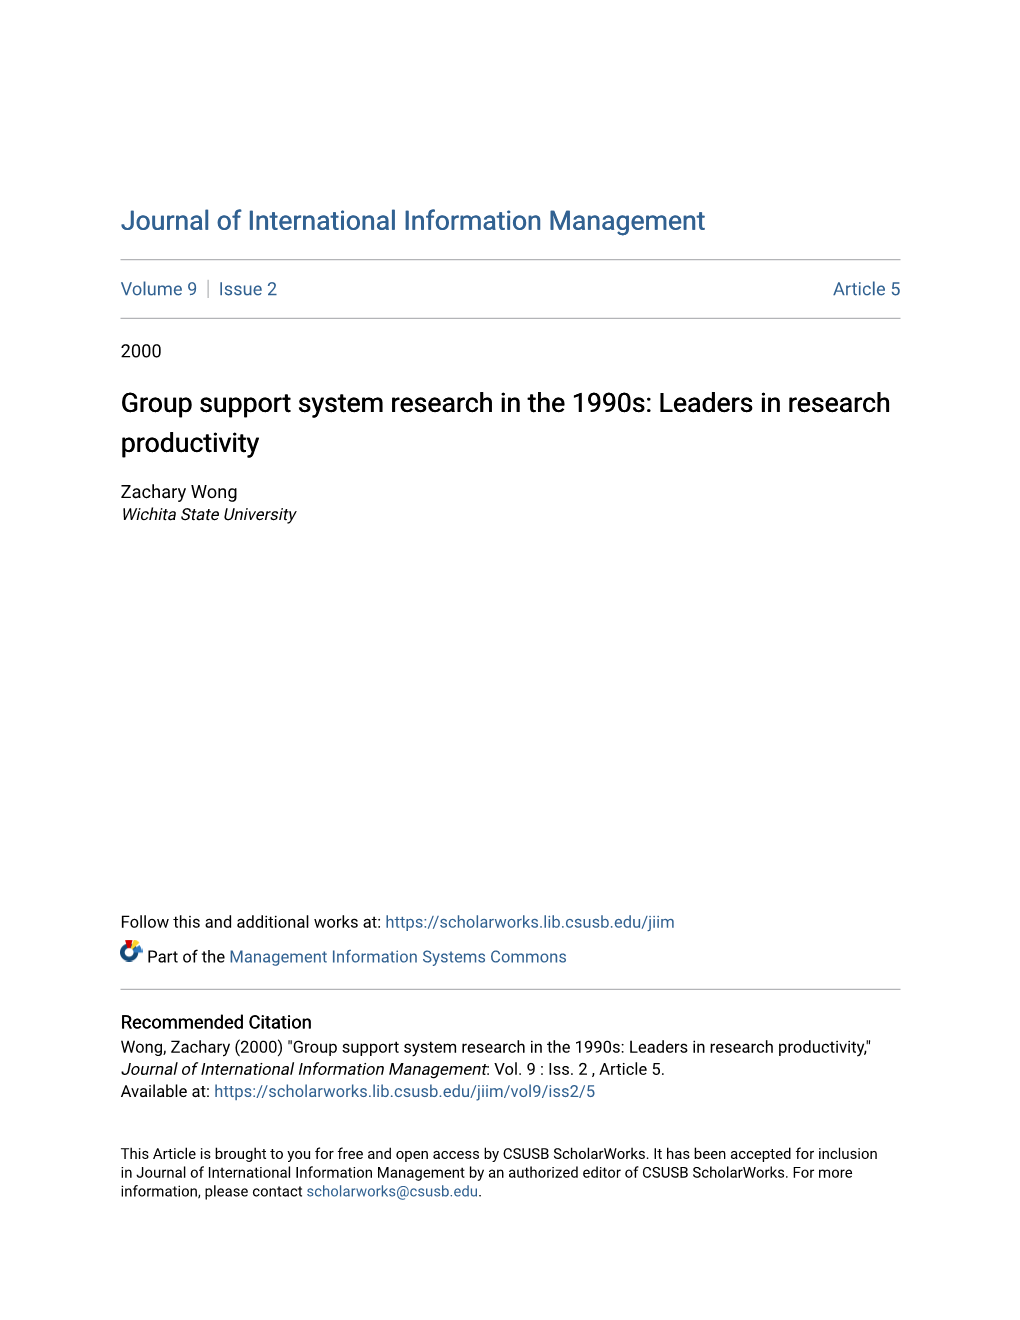 Group Support System Research in the 1990S: Leaders in Research Productivity